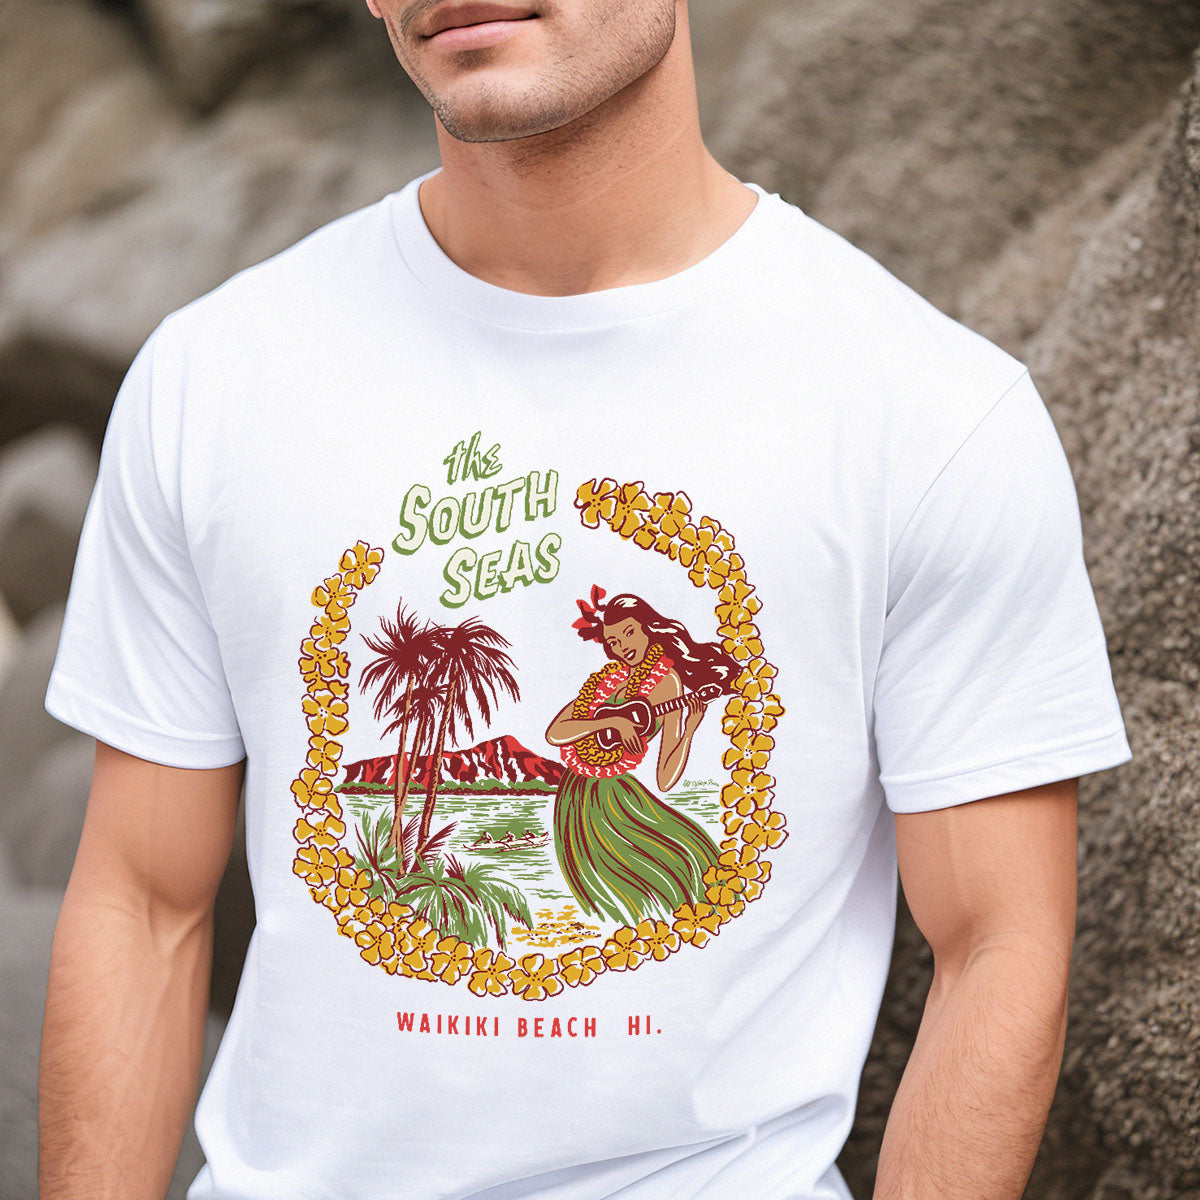 Vintage matchbook style unisex mens t-shirt with a hula girl playing a ukelele on Waikiki beach with palm trees and Diamond head in the background. Text says "The South Seas" WHite tee shirt